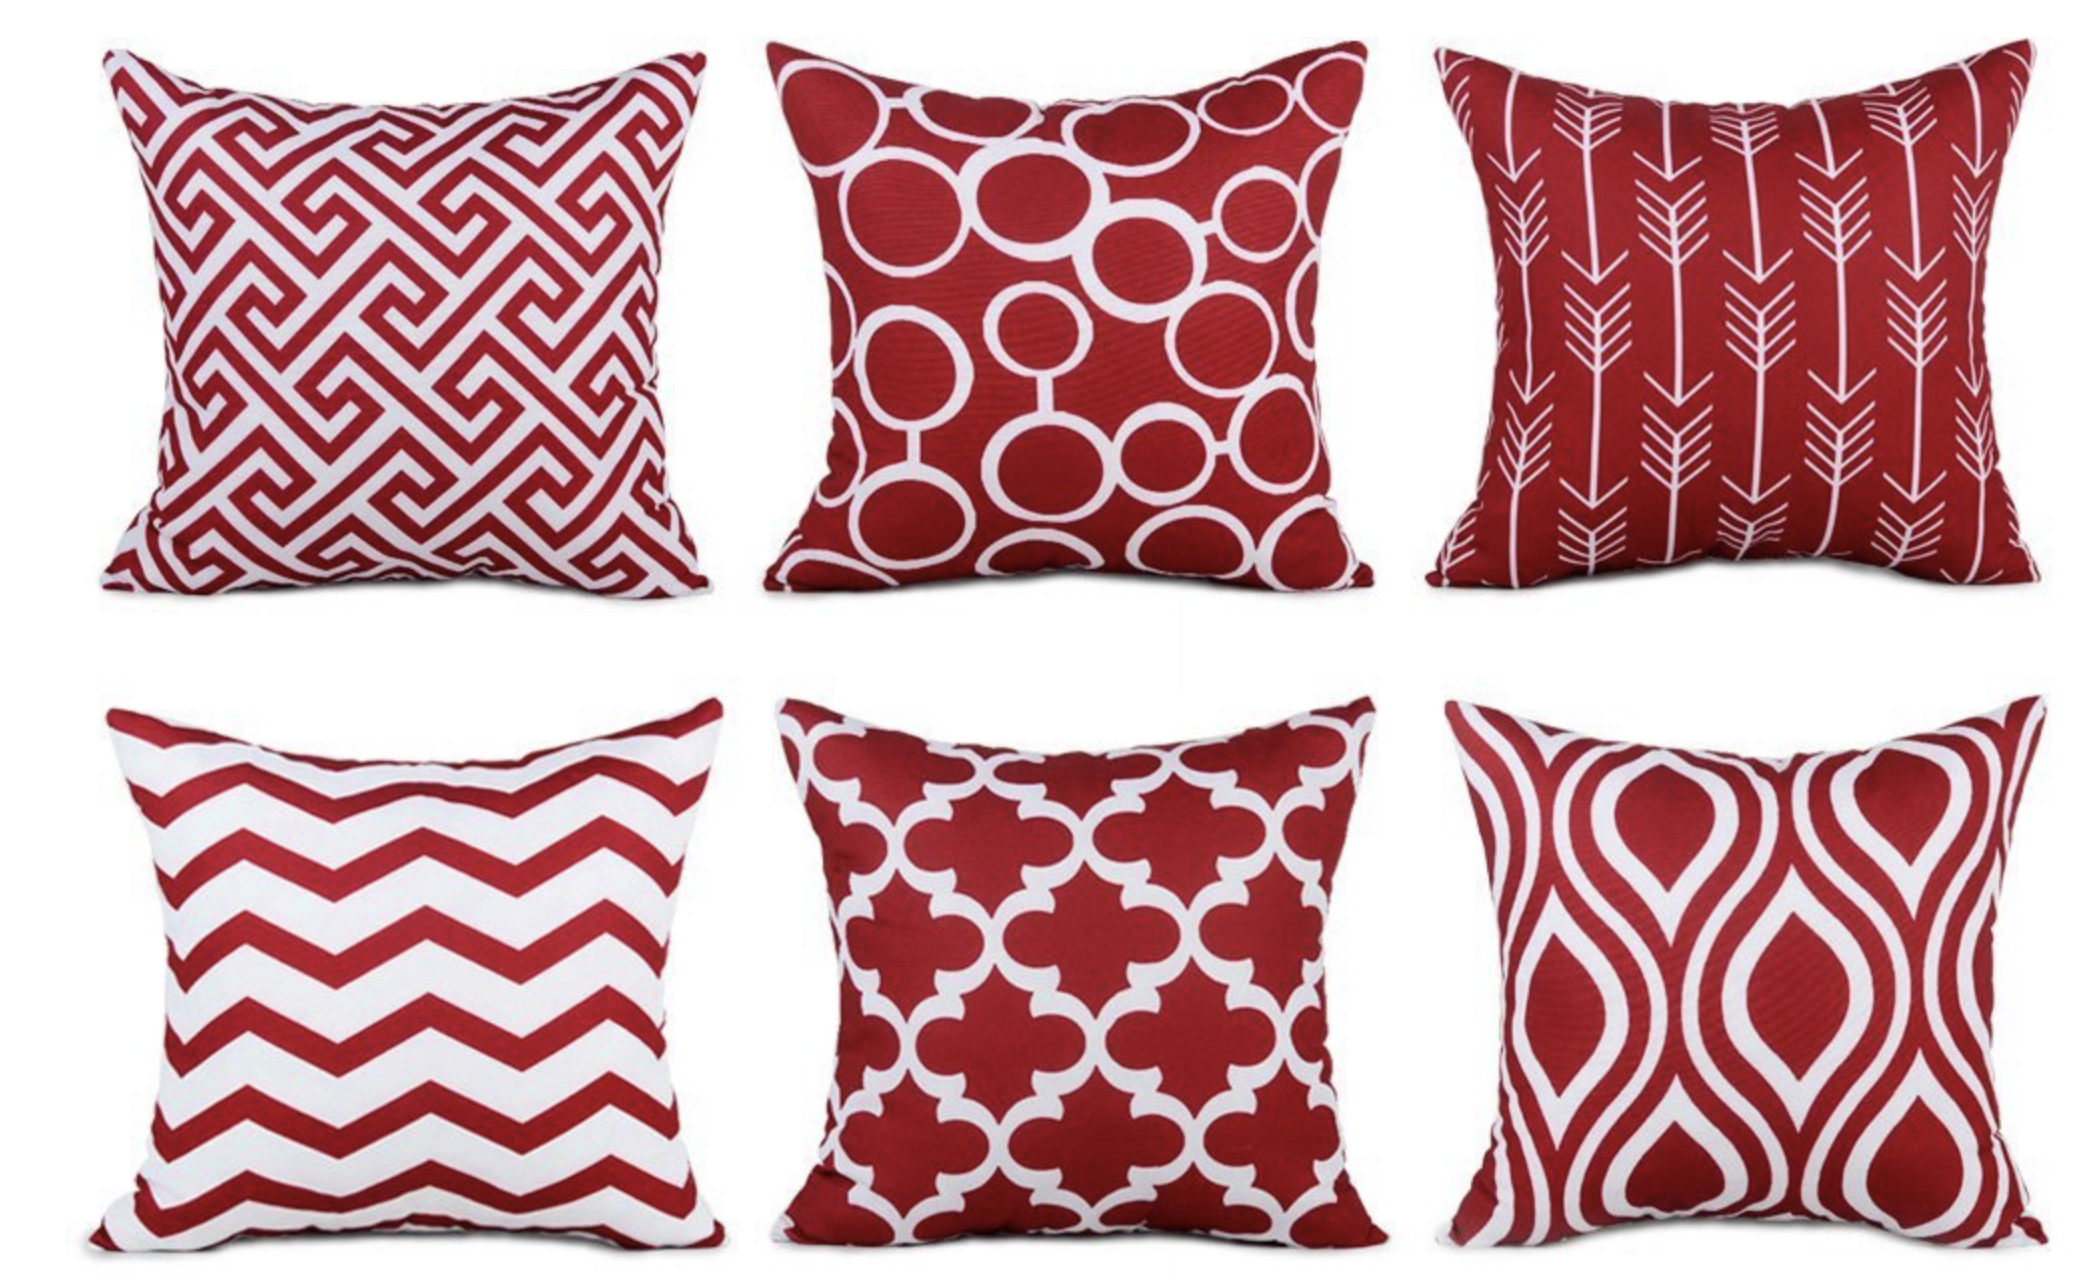 Red and White Pop Pillows